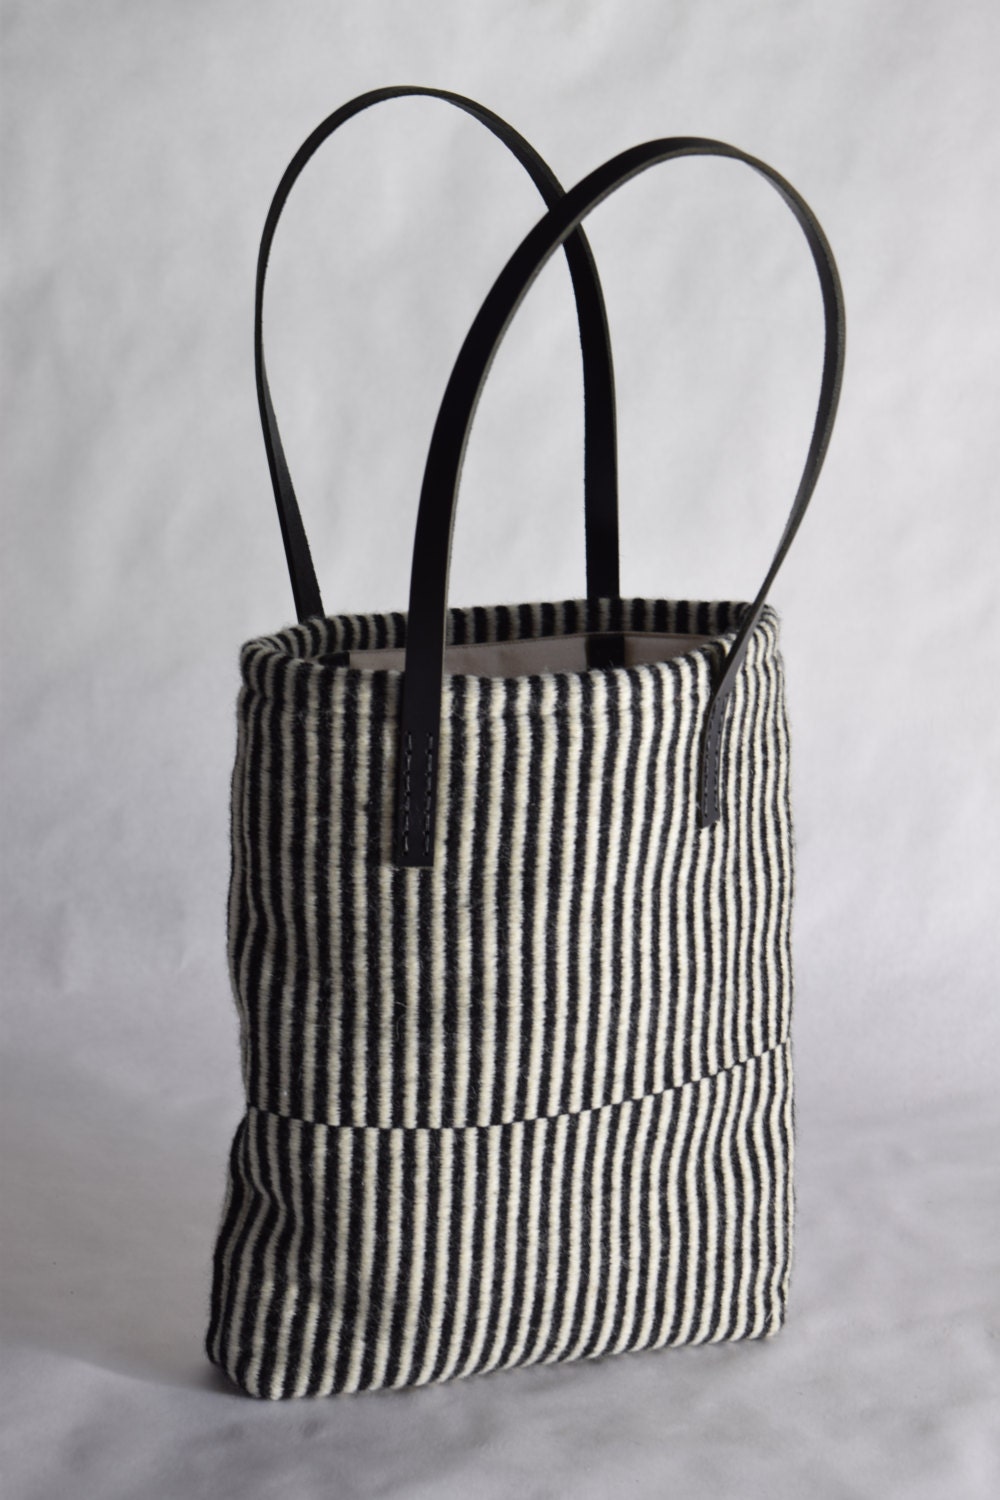 Hand woven black and white striped tote bag black leather wool